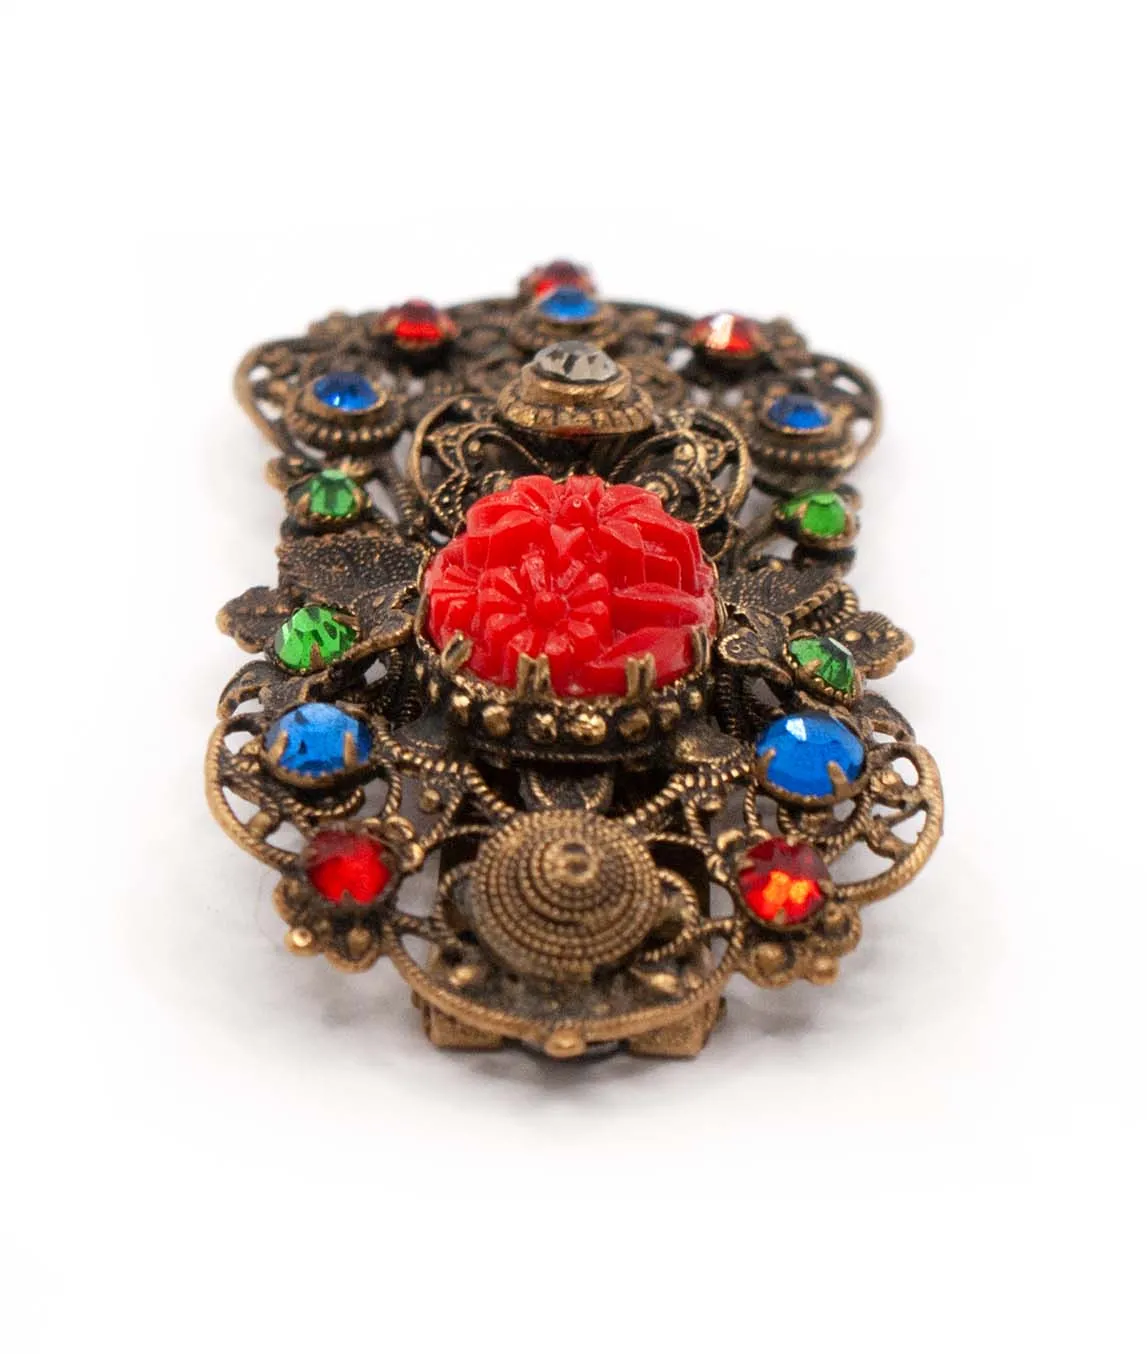 1930s Czech pierced metal dress clip decorated with red green and blue crystals and floral red pressed glass